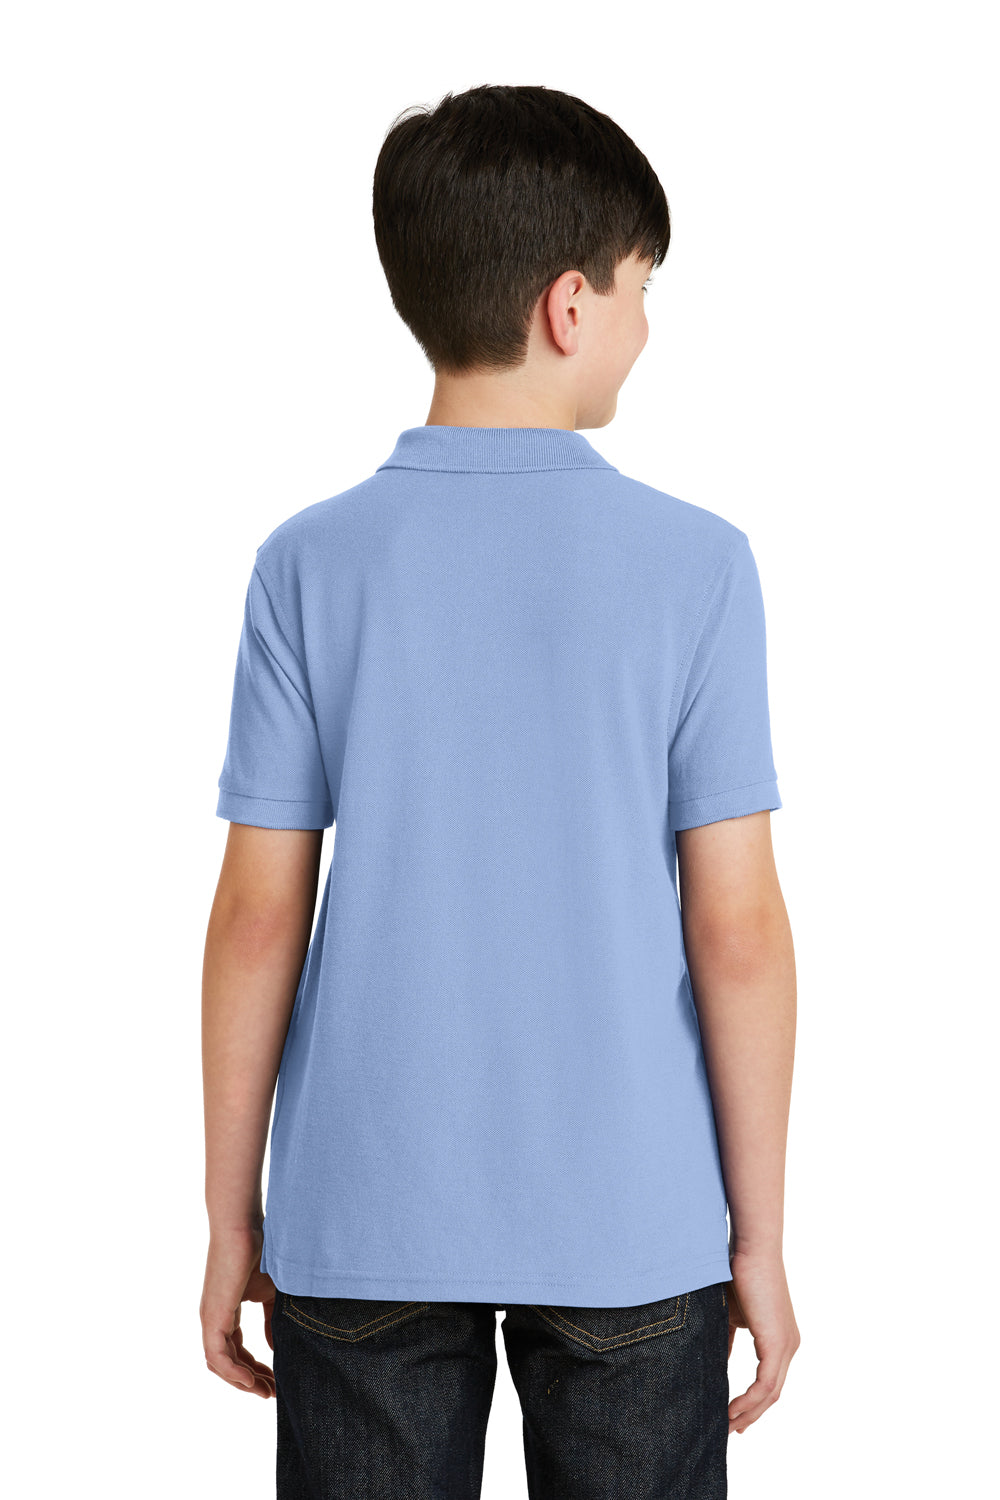 Port Authority Y500 Youth Silk Touch Wrinkle Resistant Short Sleeve Polo Shirt Light Blue Back